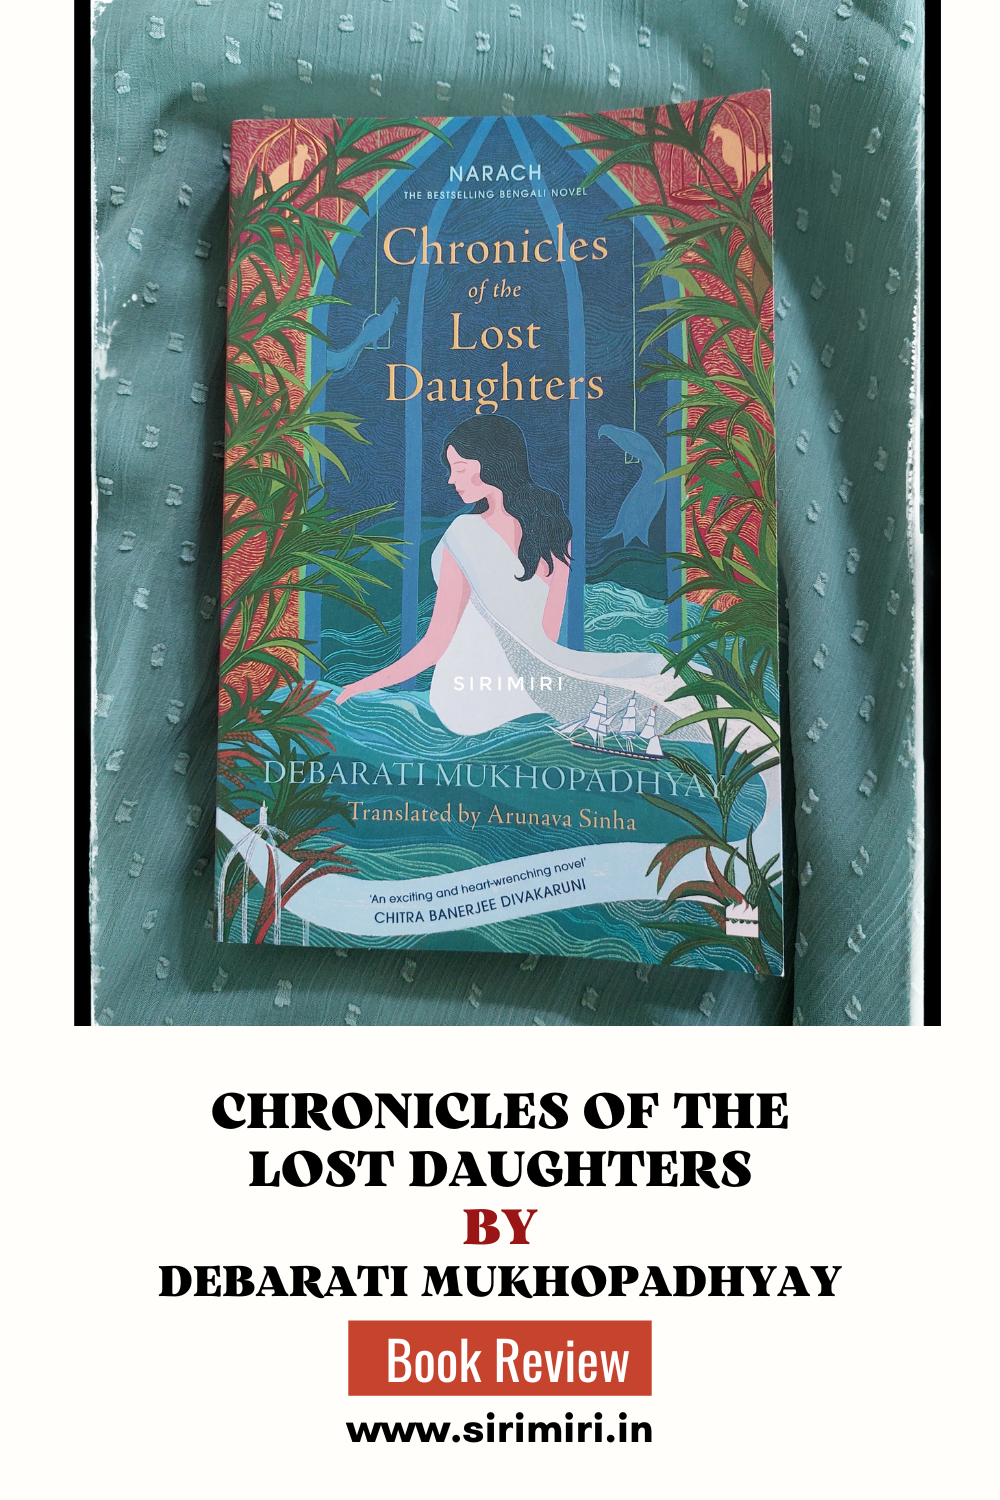 #BookReview : Chronicles Of The Lost Daughters By Debarati Mukhopadhyay - Sirimiri